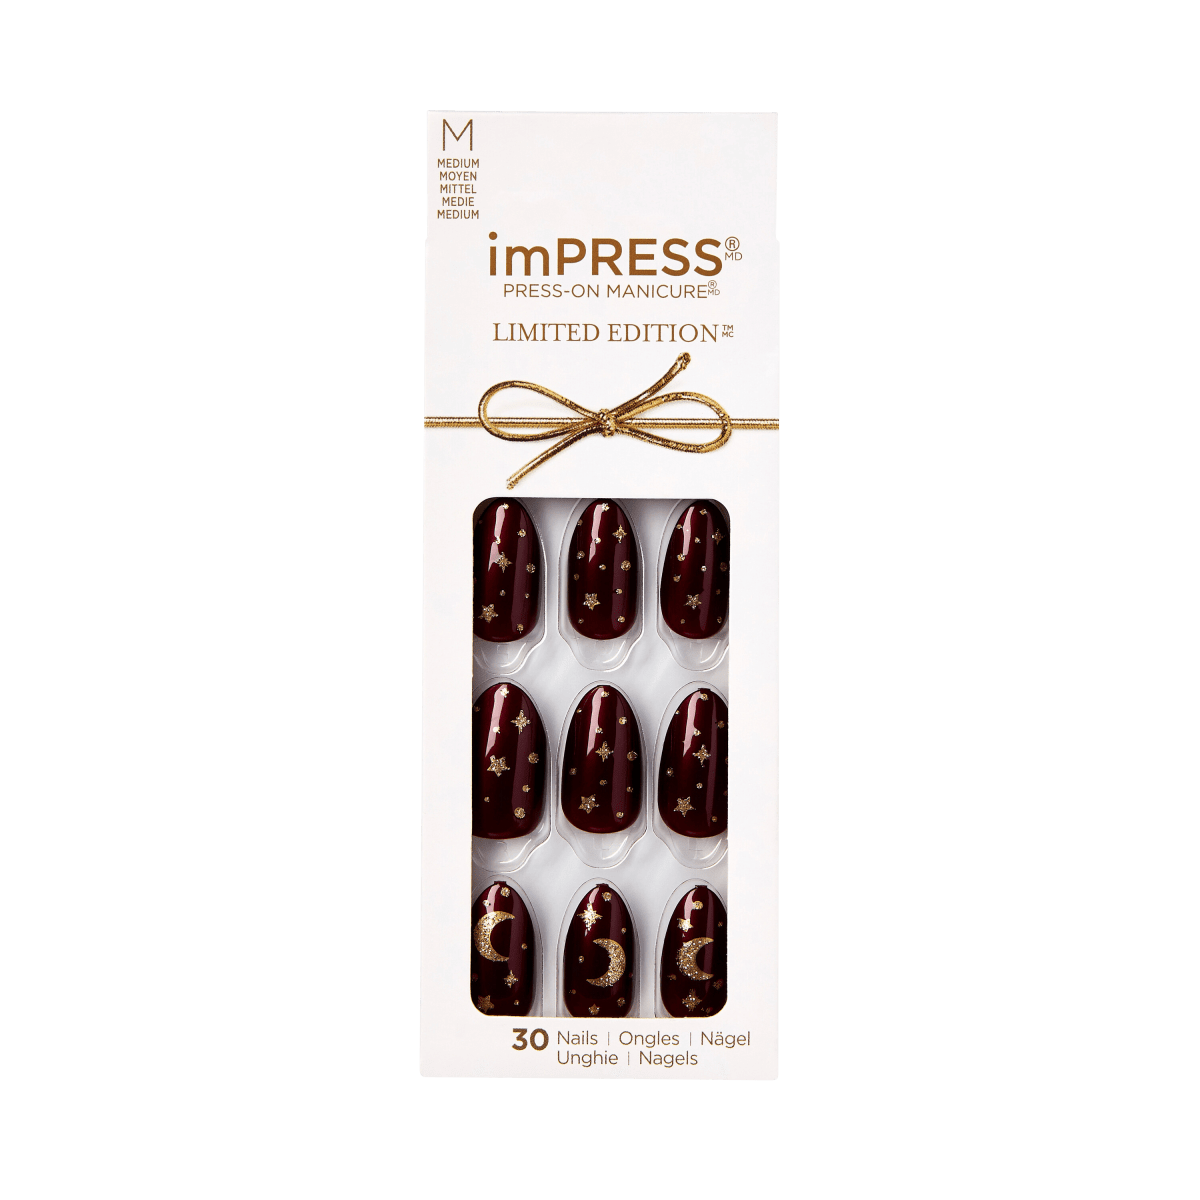 imPRESS Limited-Edition Holiday Press-On Nails - Snowed In